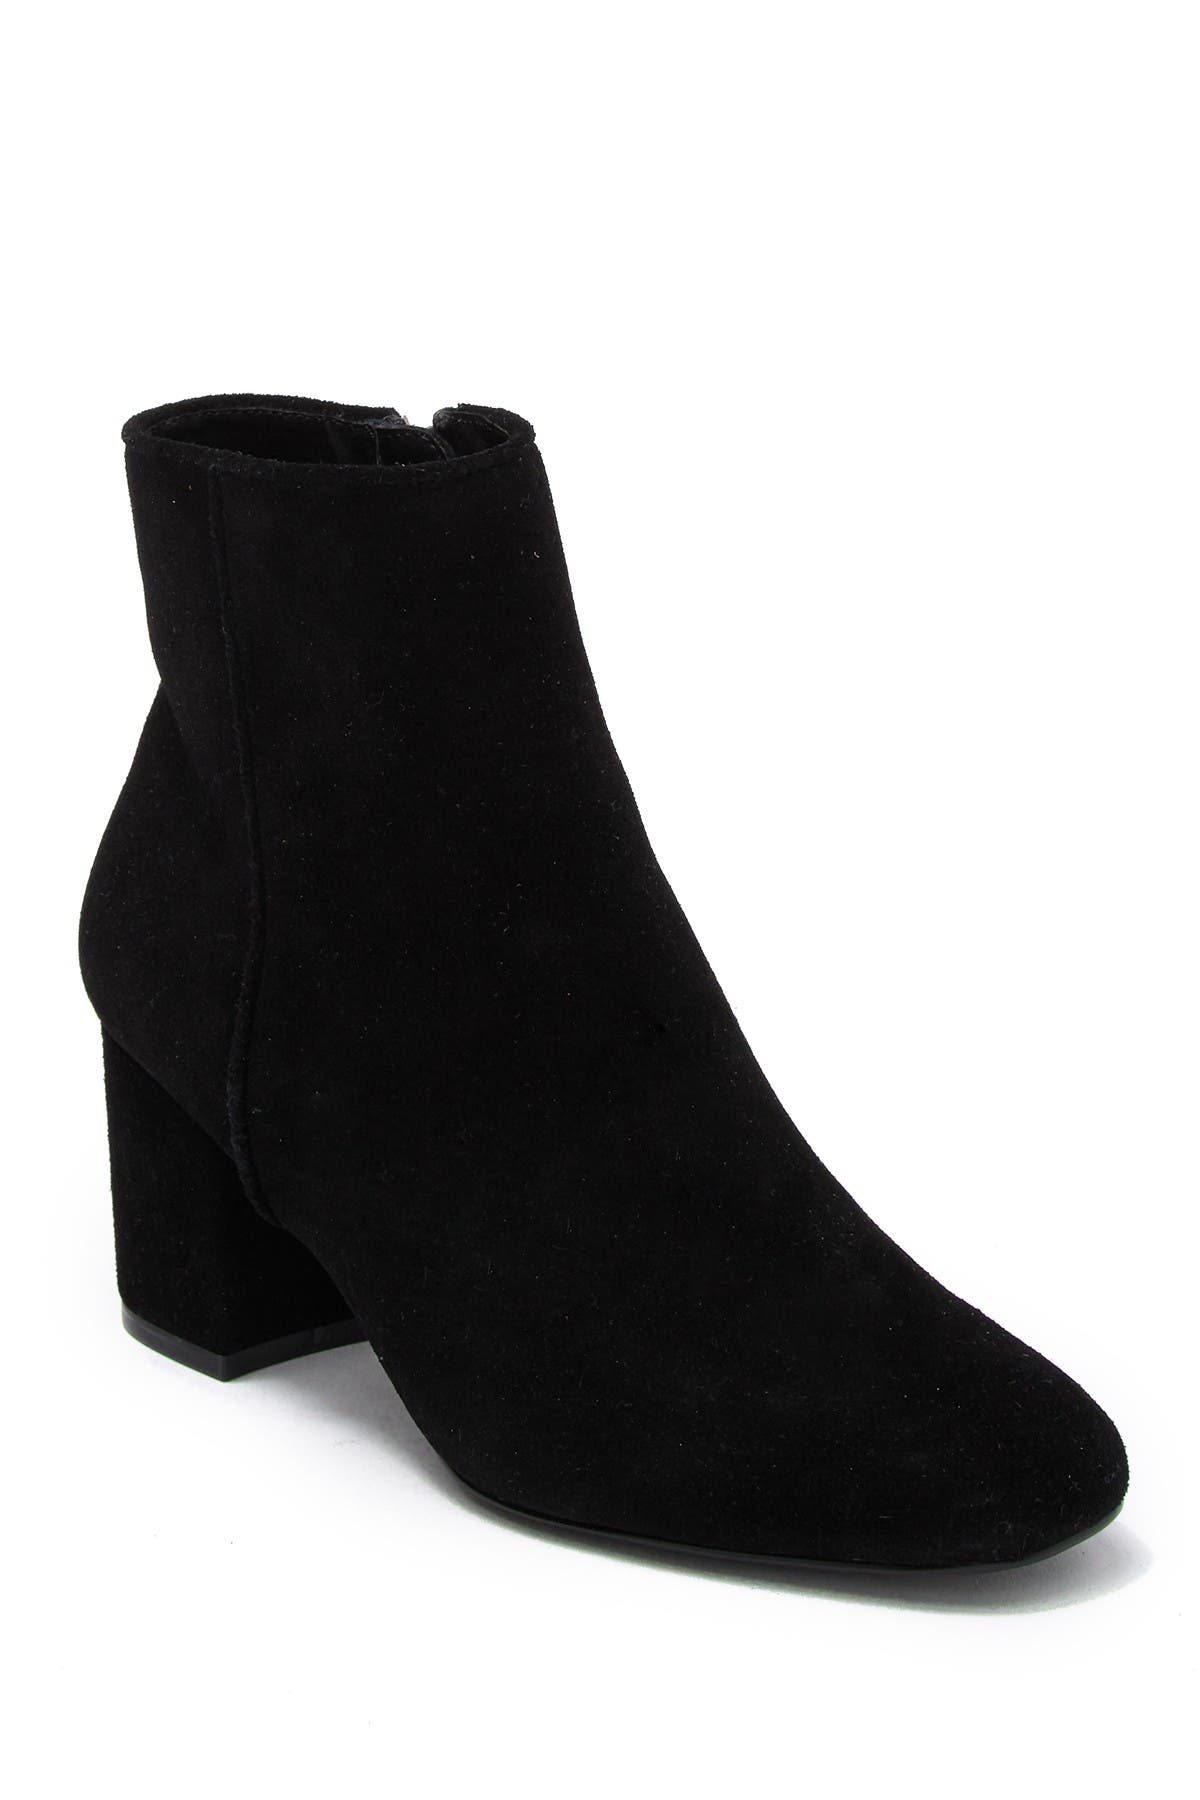 Steve Madden | Rey Suede Ankle Boot 